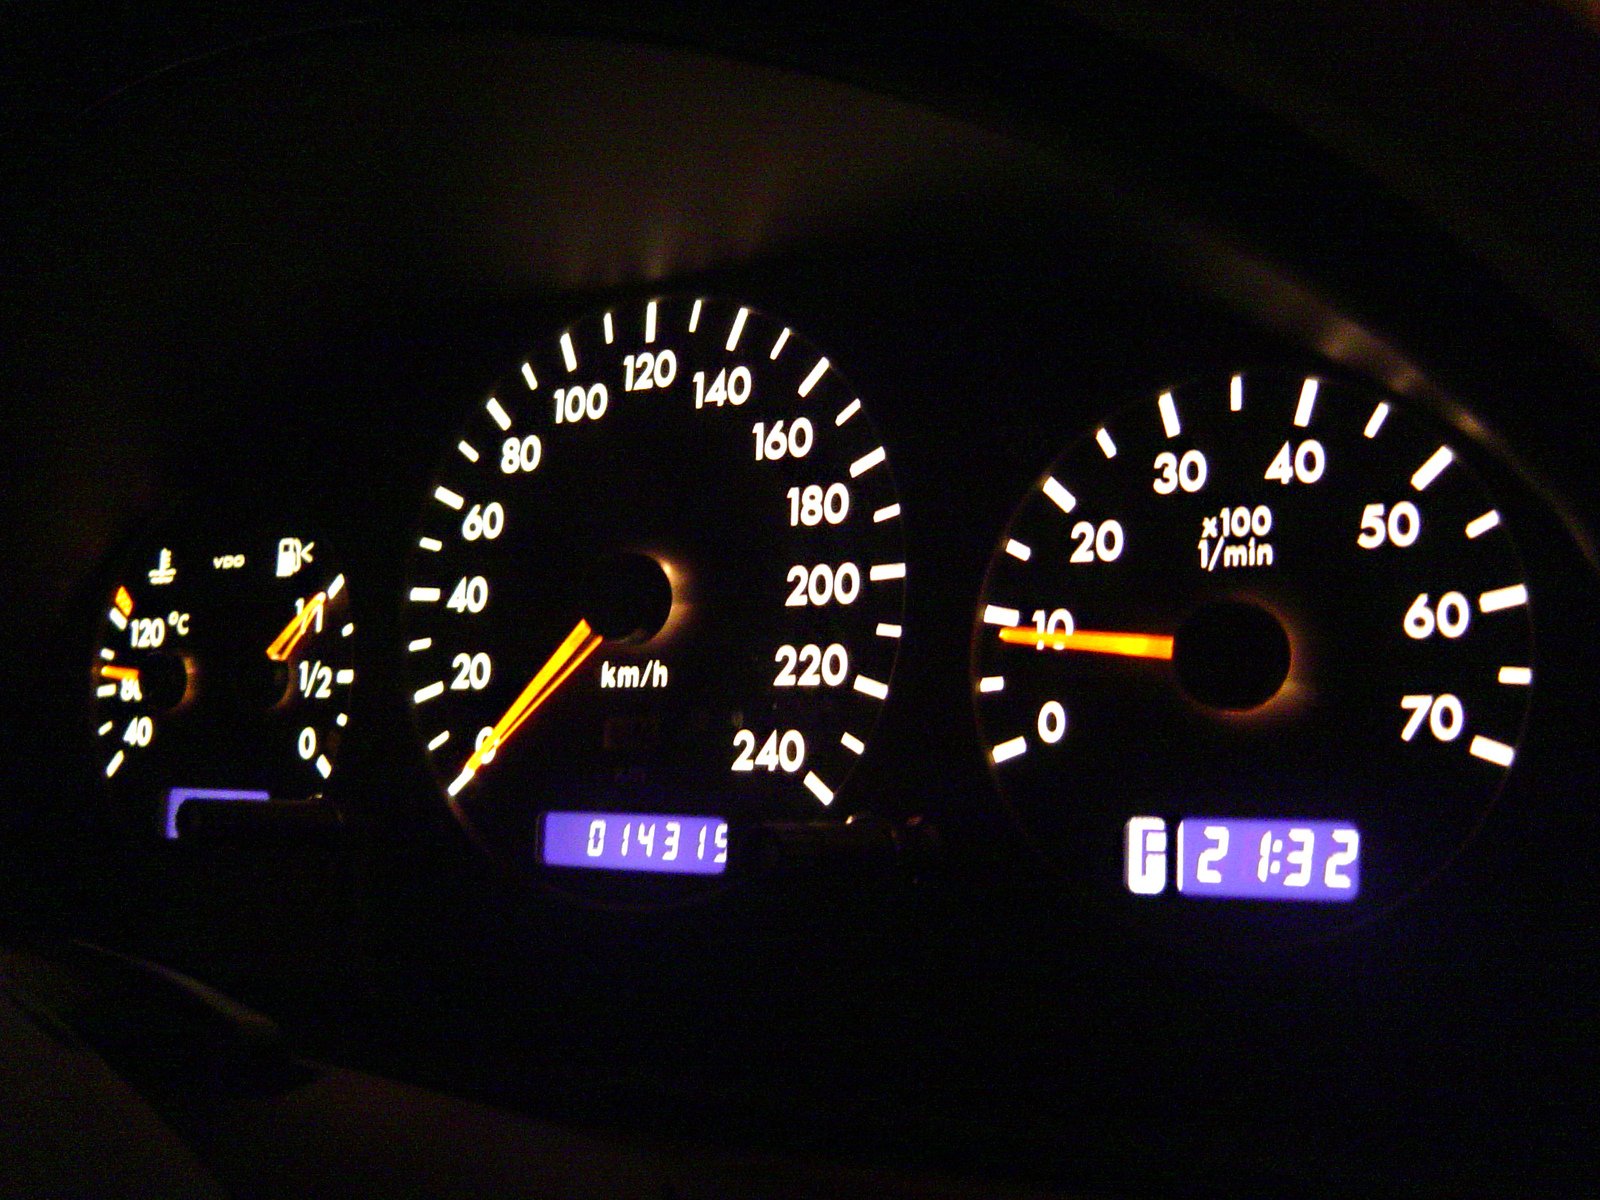 the instruments in the dashboard are illuminated by blue numbers